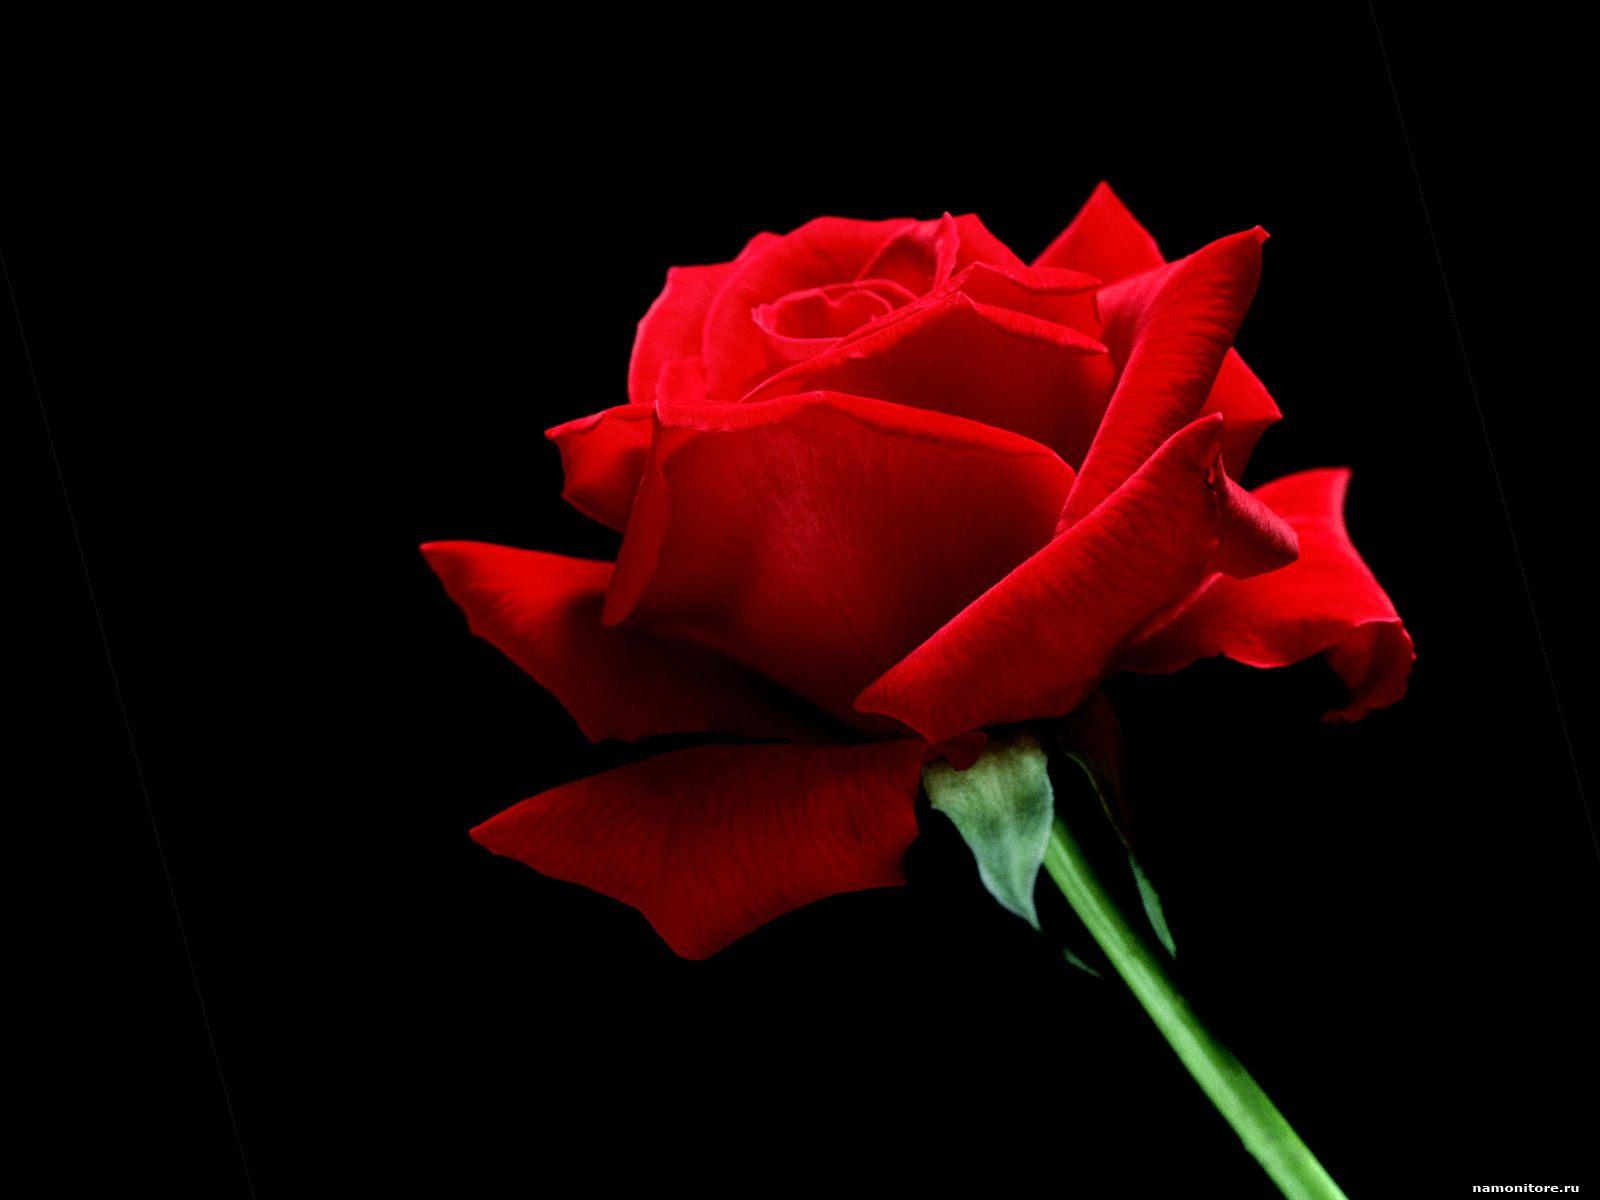 Red Rose On A Black Background Flowers Roses